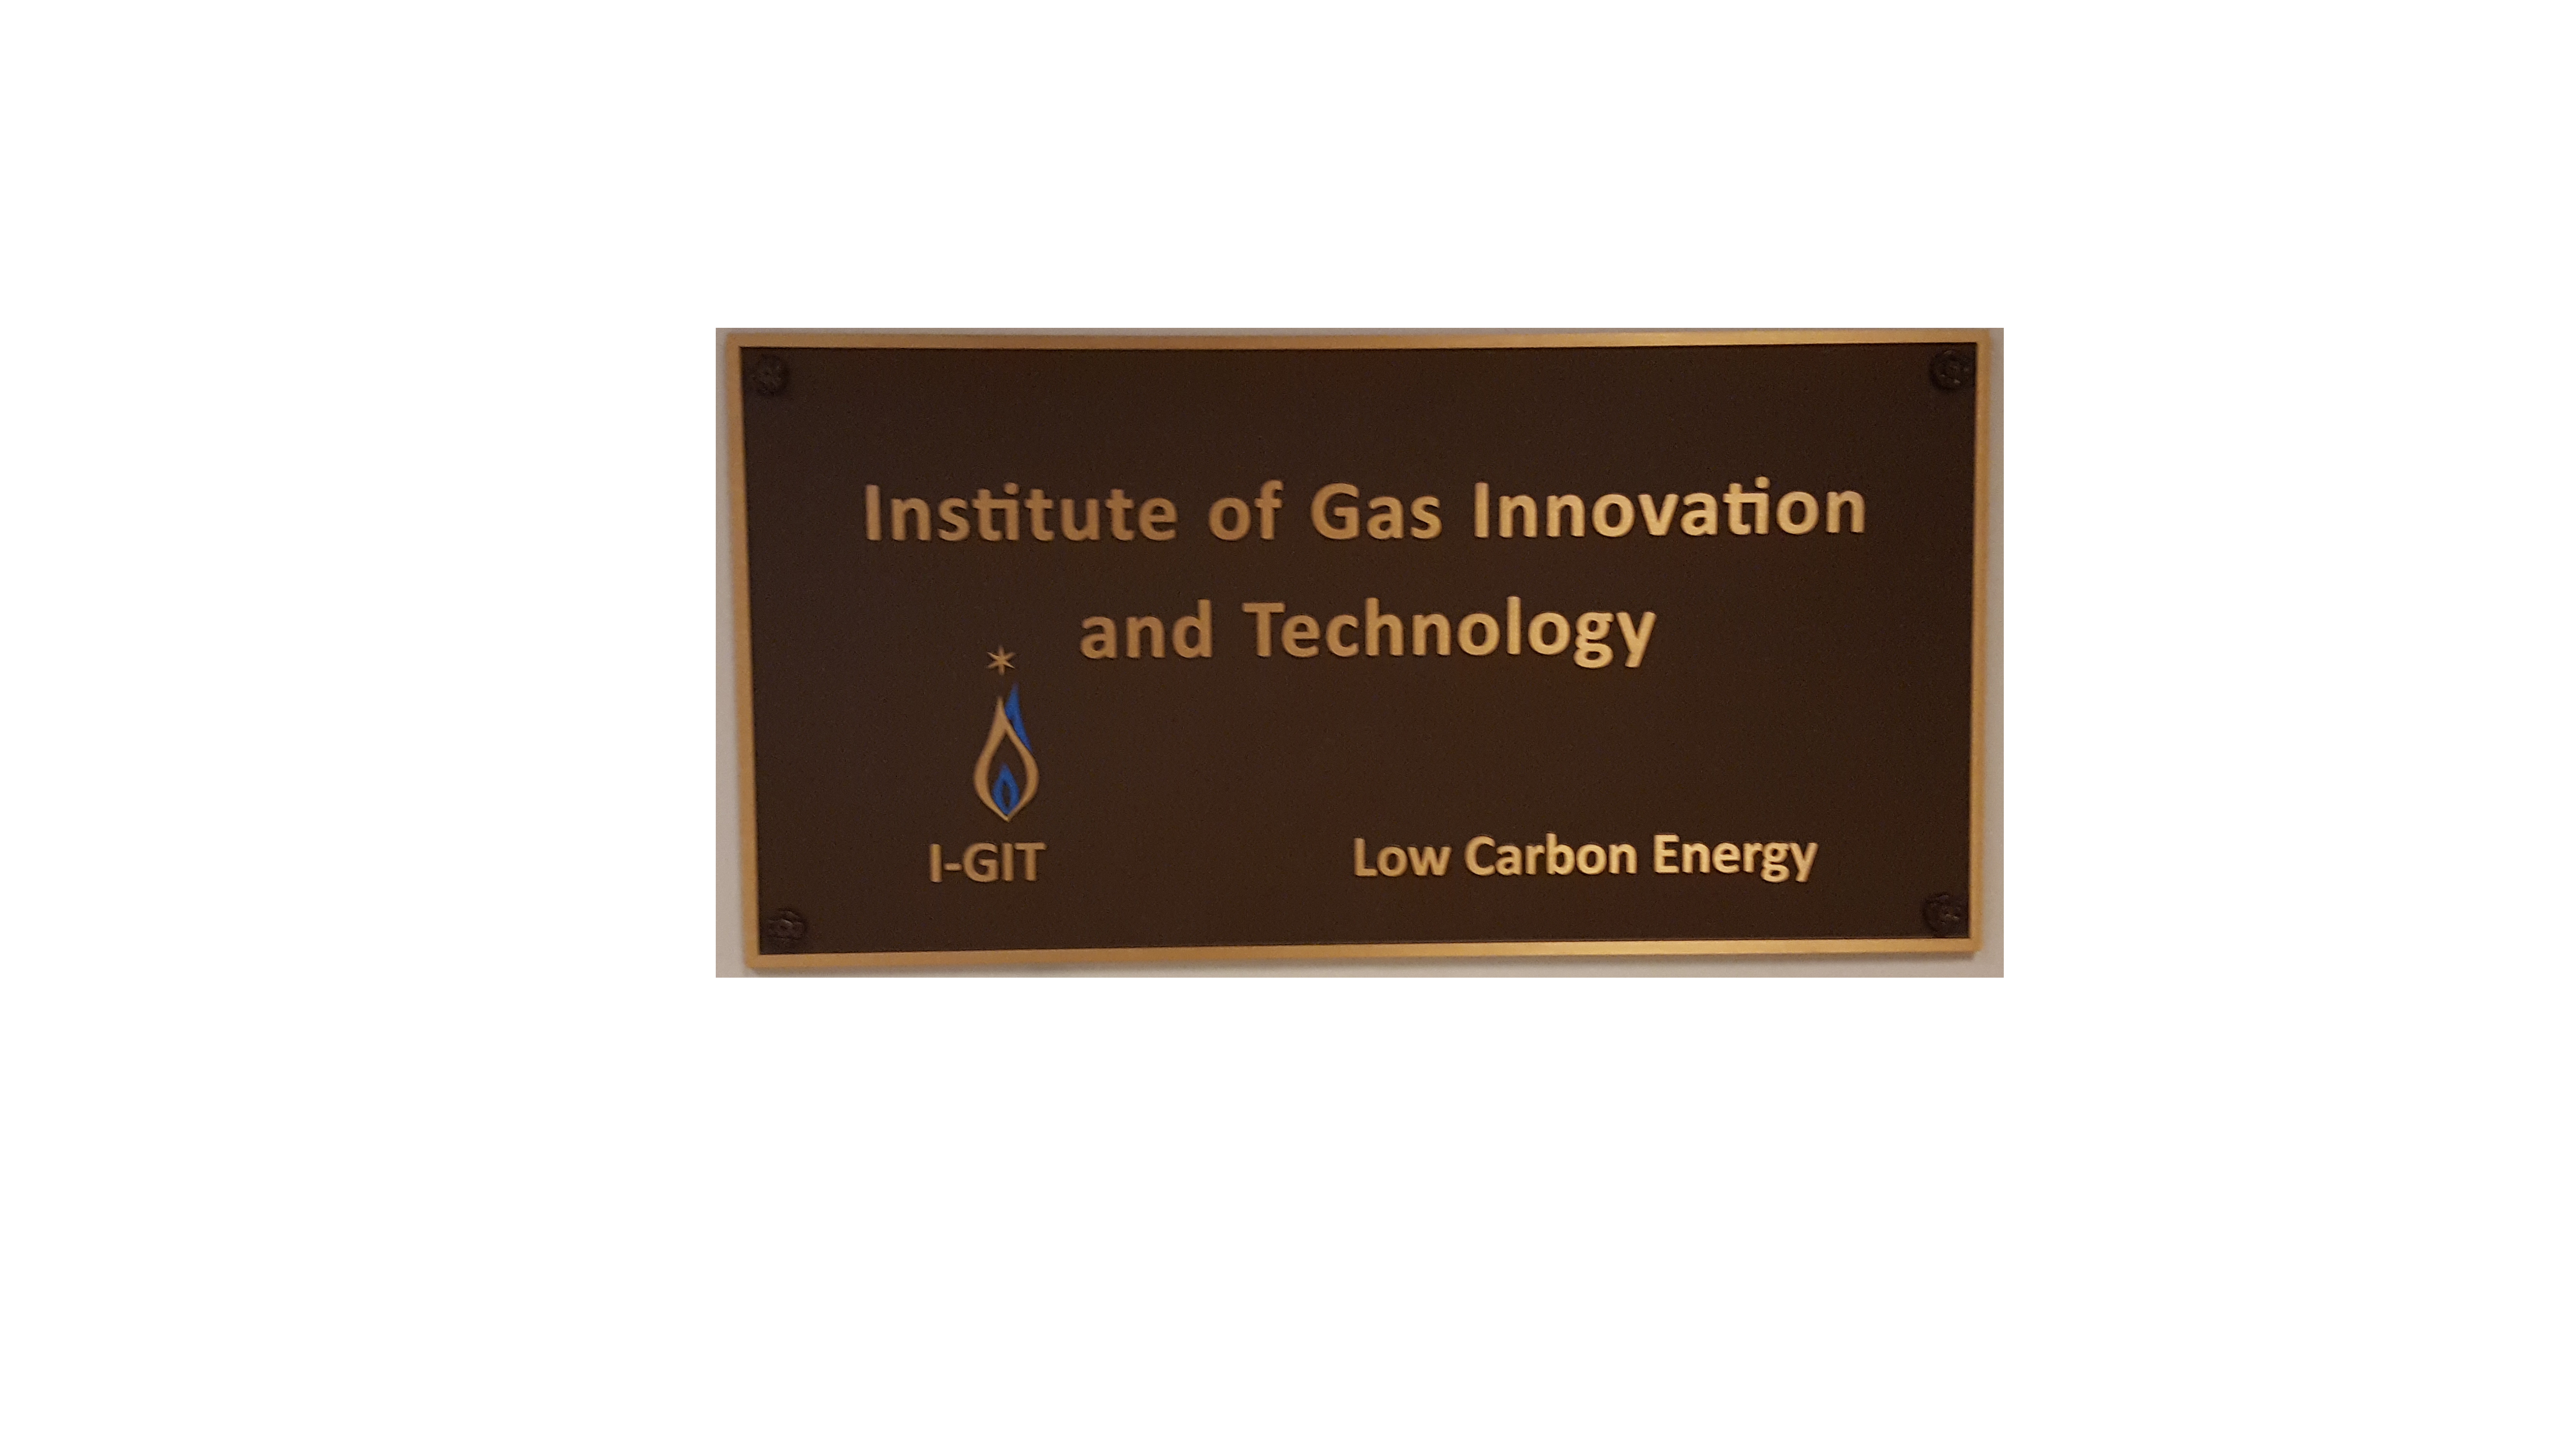 Institute of Gas Innovation and Technology